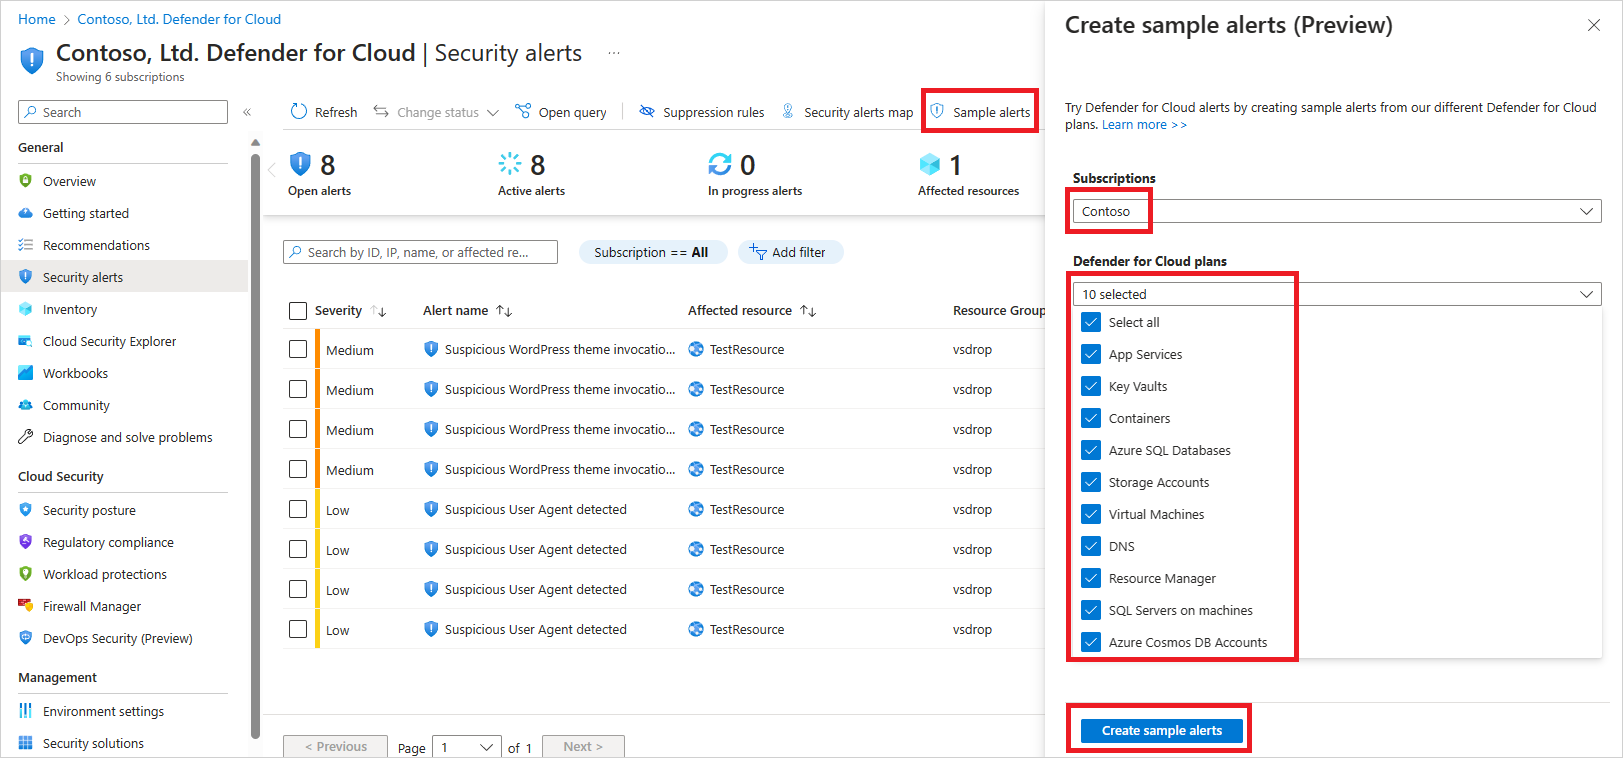 Steps to create sample alerts in Microsoft Defender for Cloud.